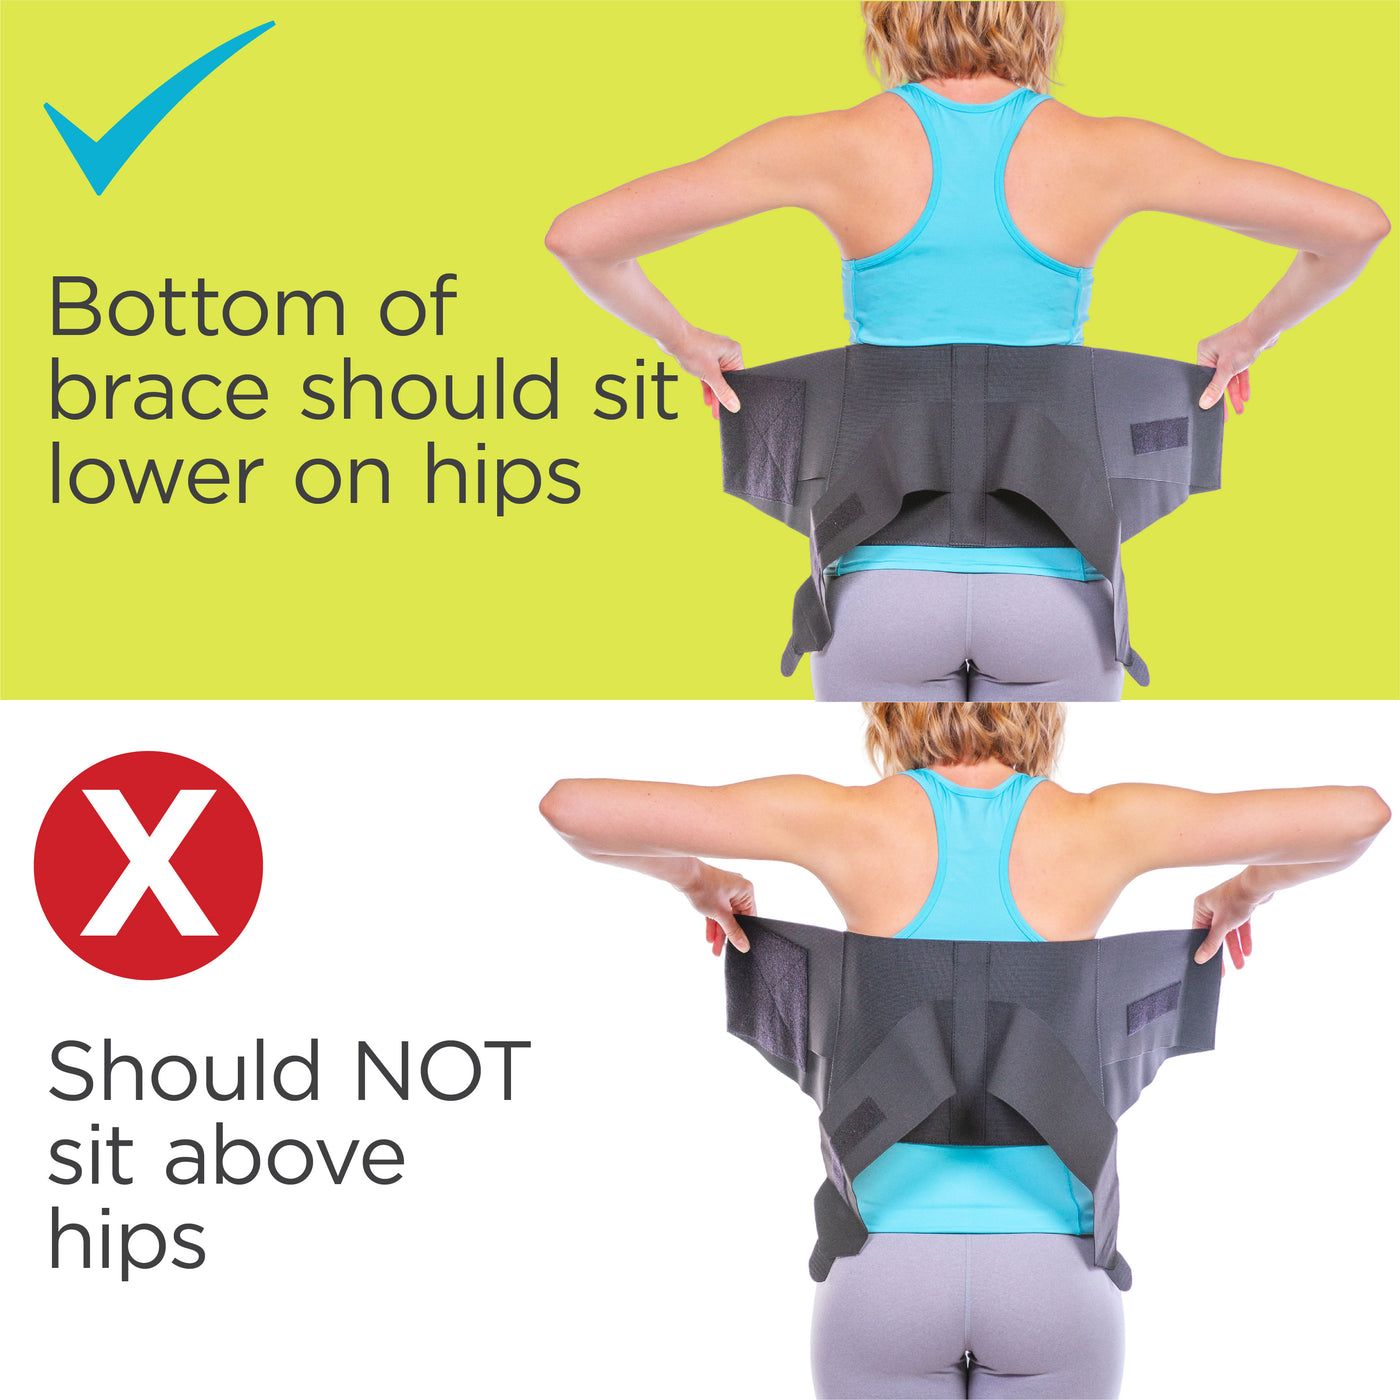 Should I use a lumbar support at night?